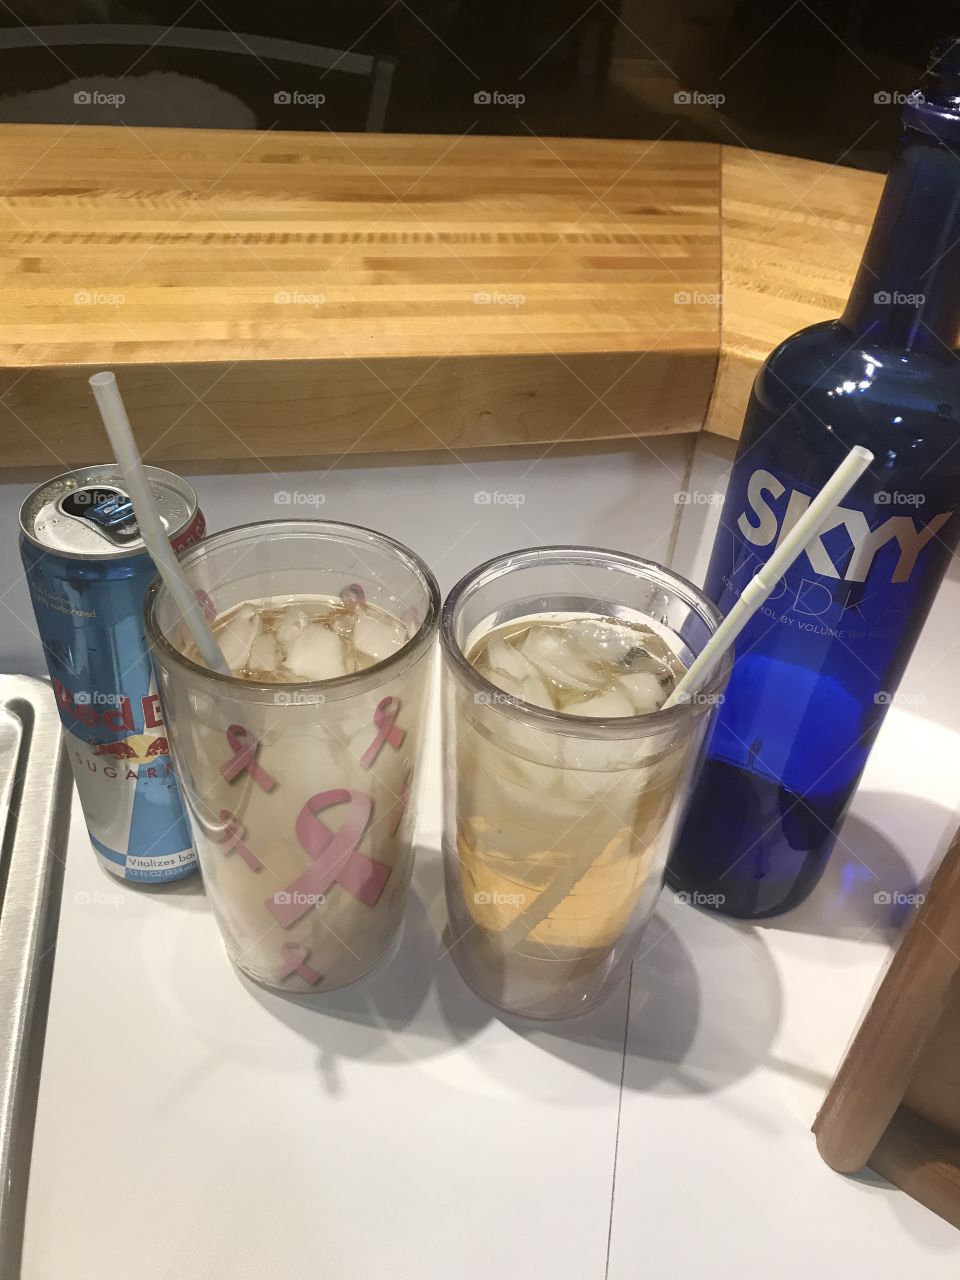 Skyy vodka and sugar free RedBull is the perfect low calorie, caffeinated cocktail. 